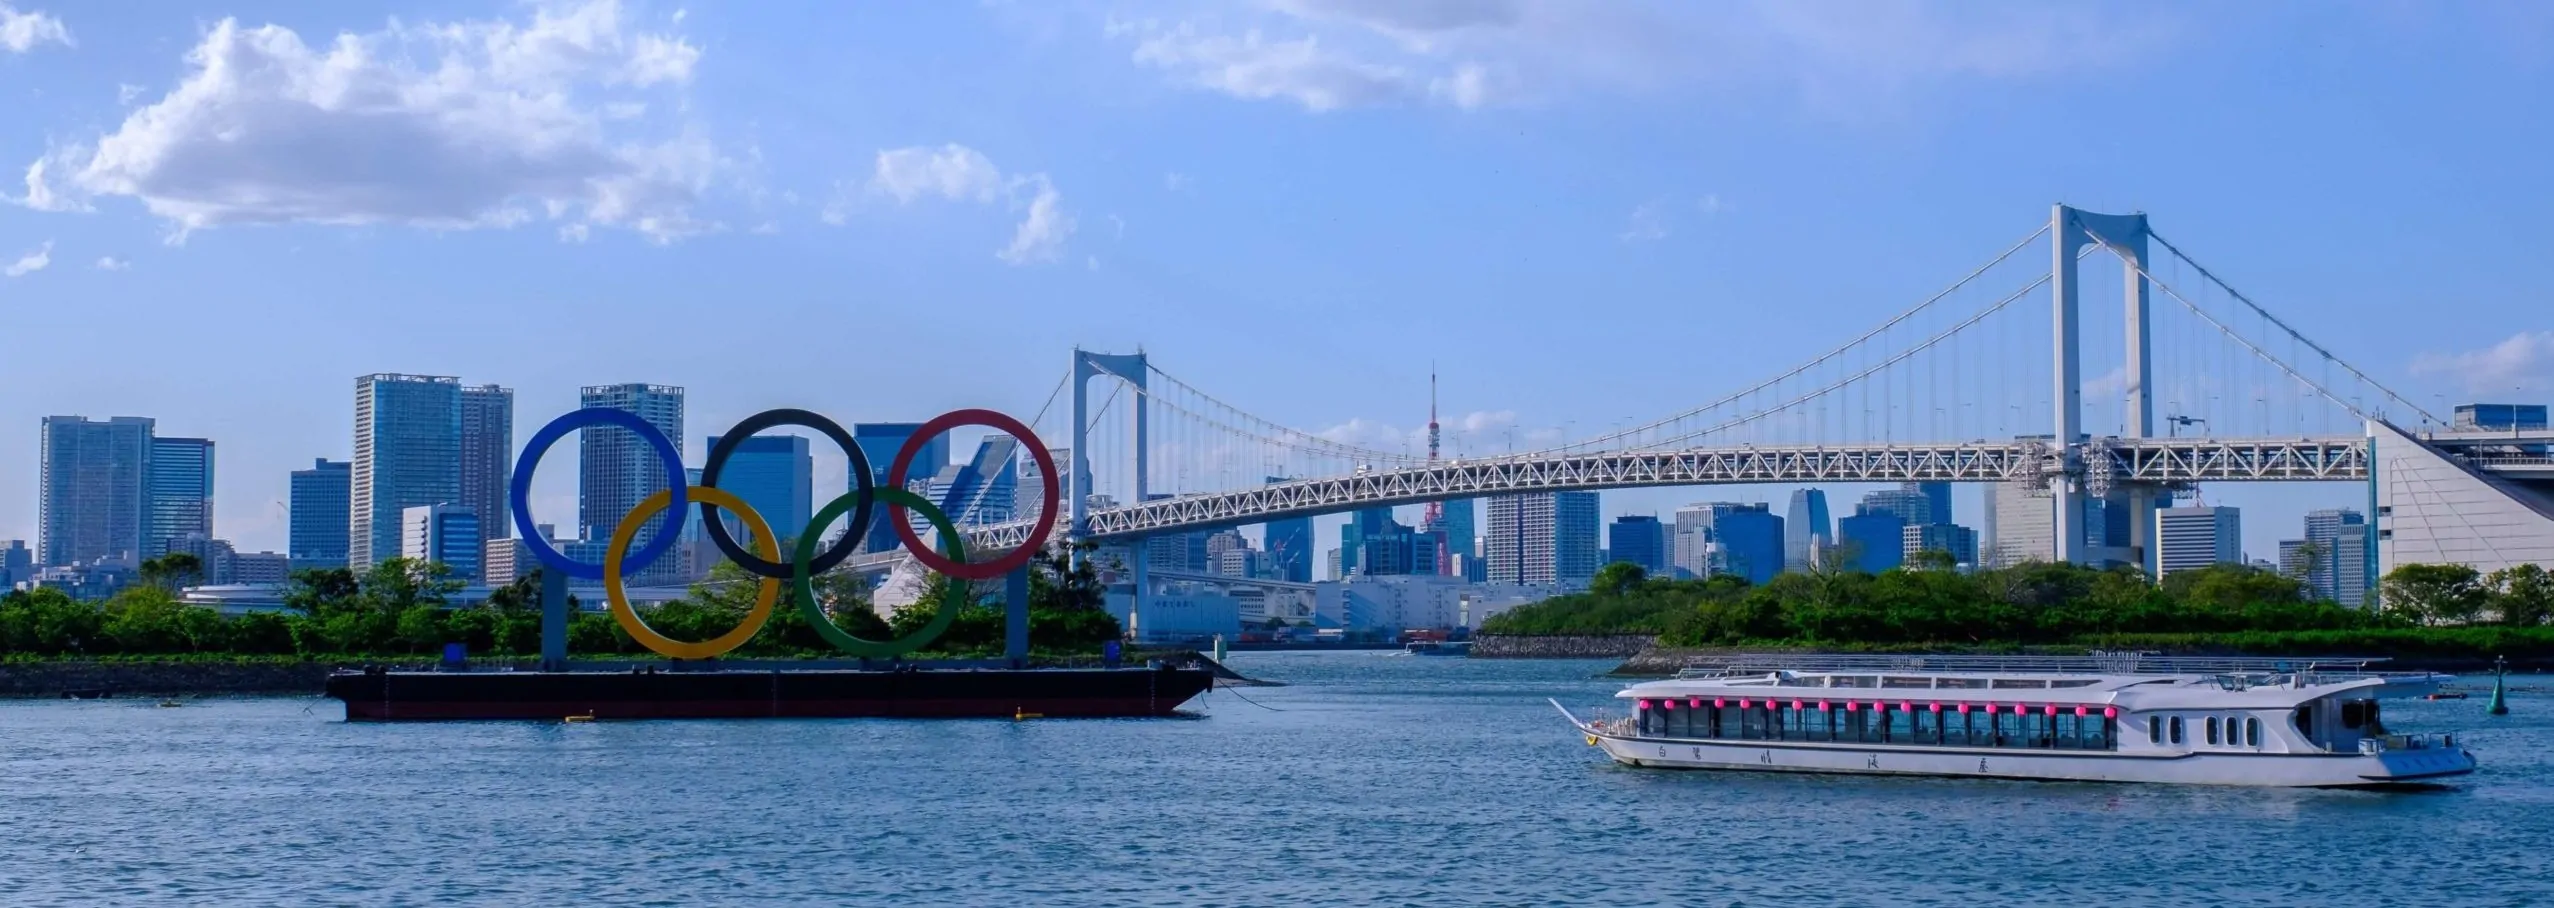 An Ode to Excellence - The 2020 Tokyo Olympics